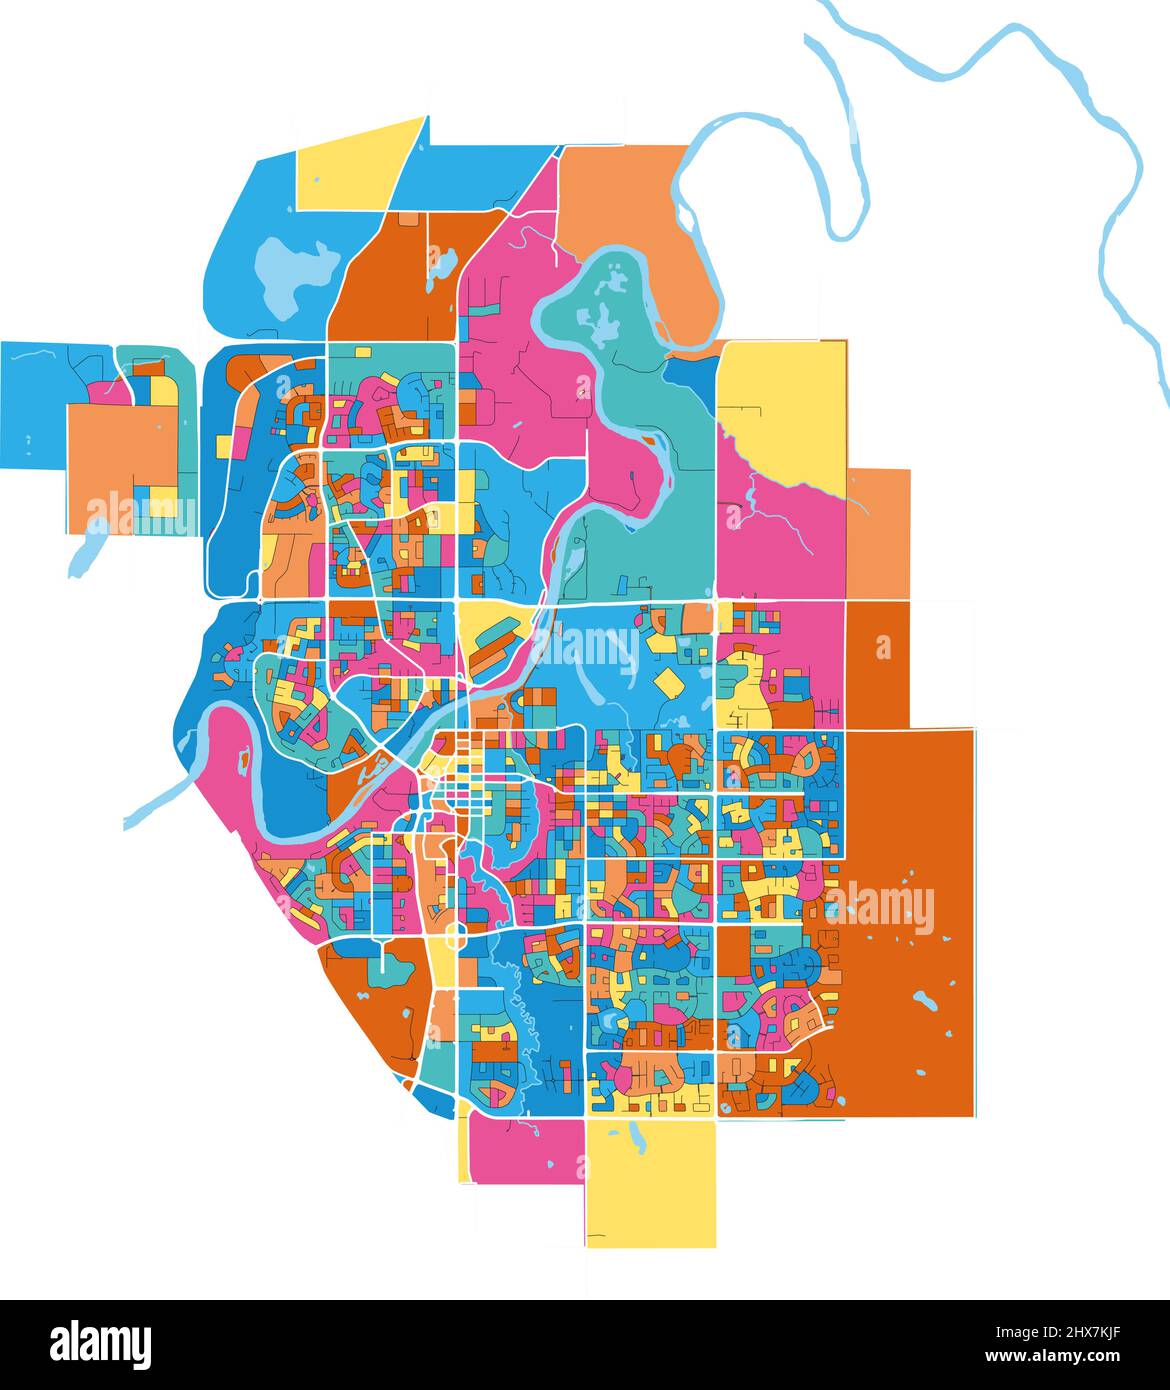 RedDeer, Alberta, Canada colorful high resolution vector art map with city boundaries. White outlines for main roads. Many details. Blue shapes for wa Stock Vector